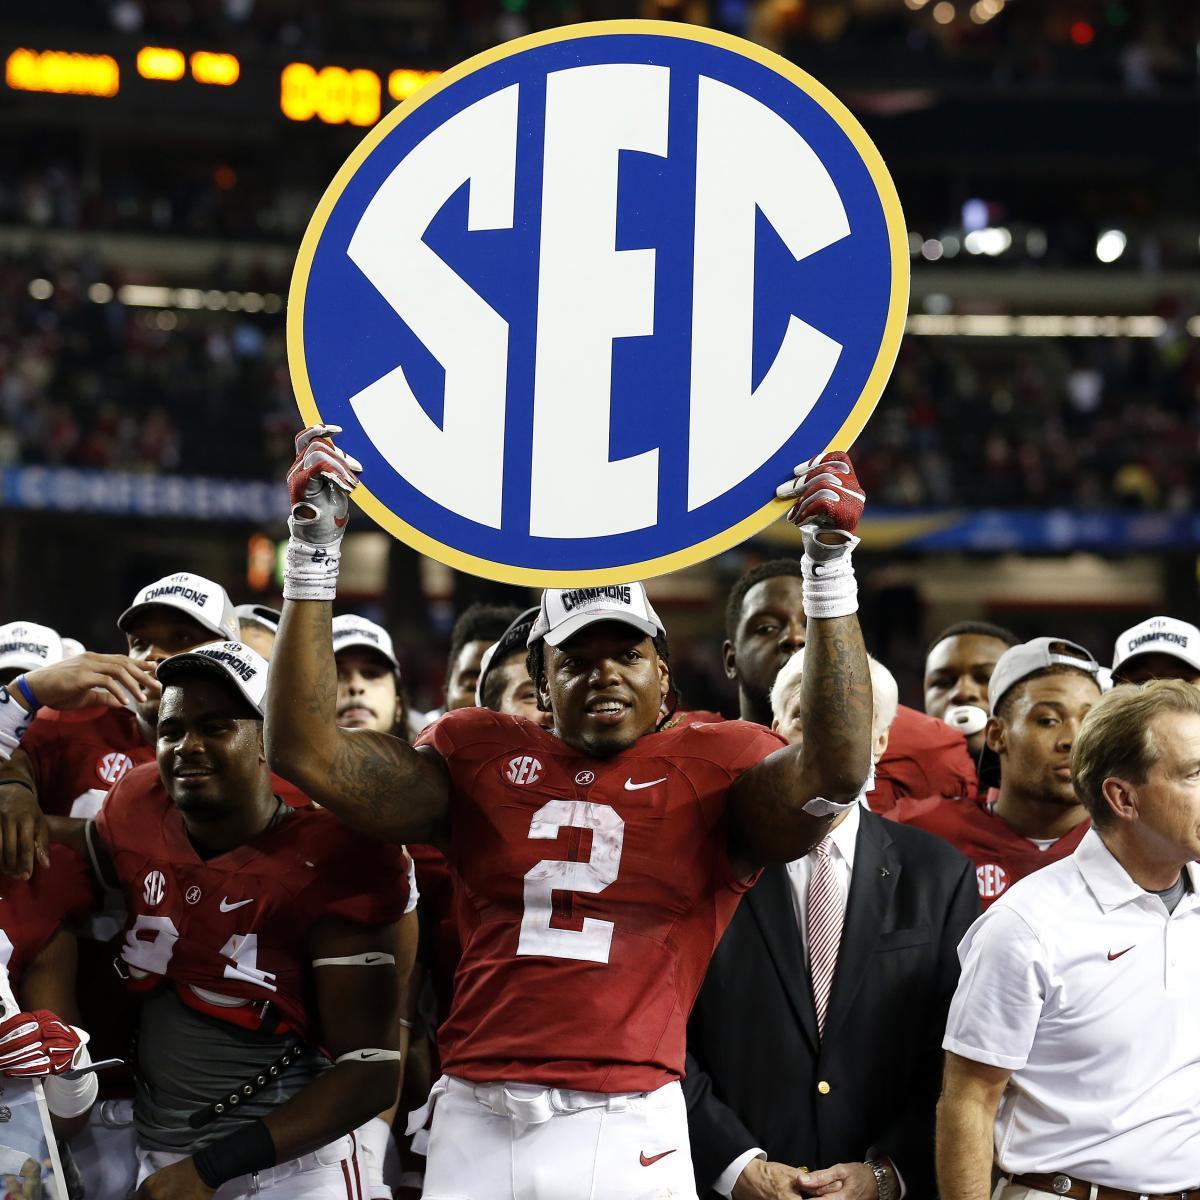 SEC Champion Alabama Should Be the Favorite to Win the College Football